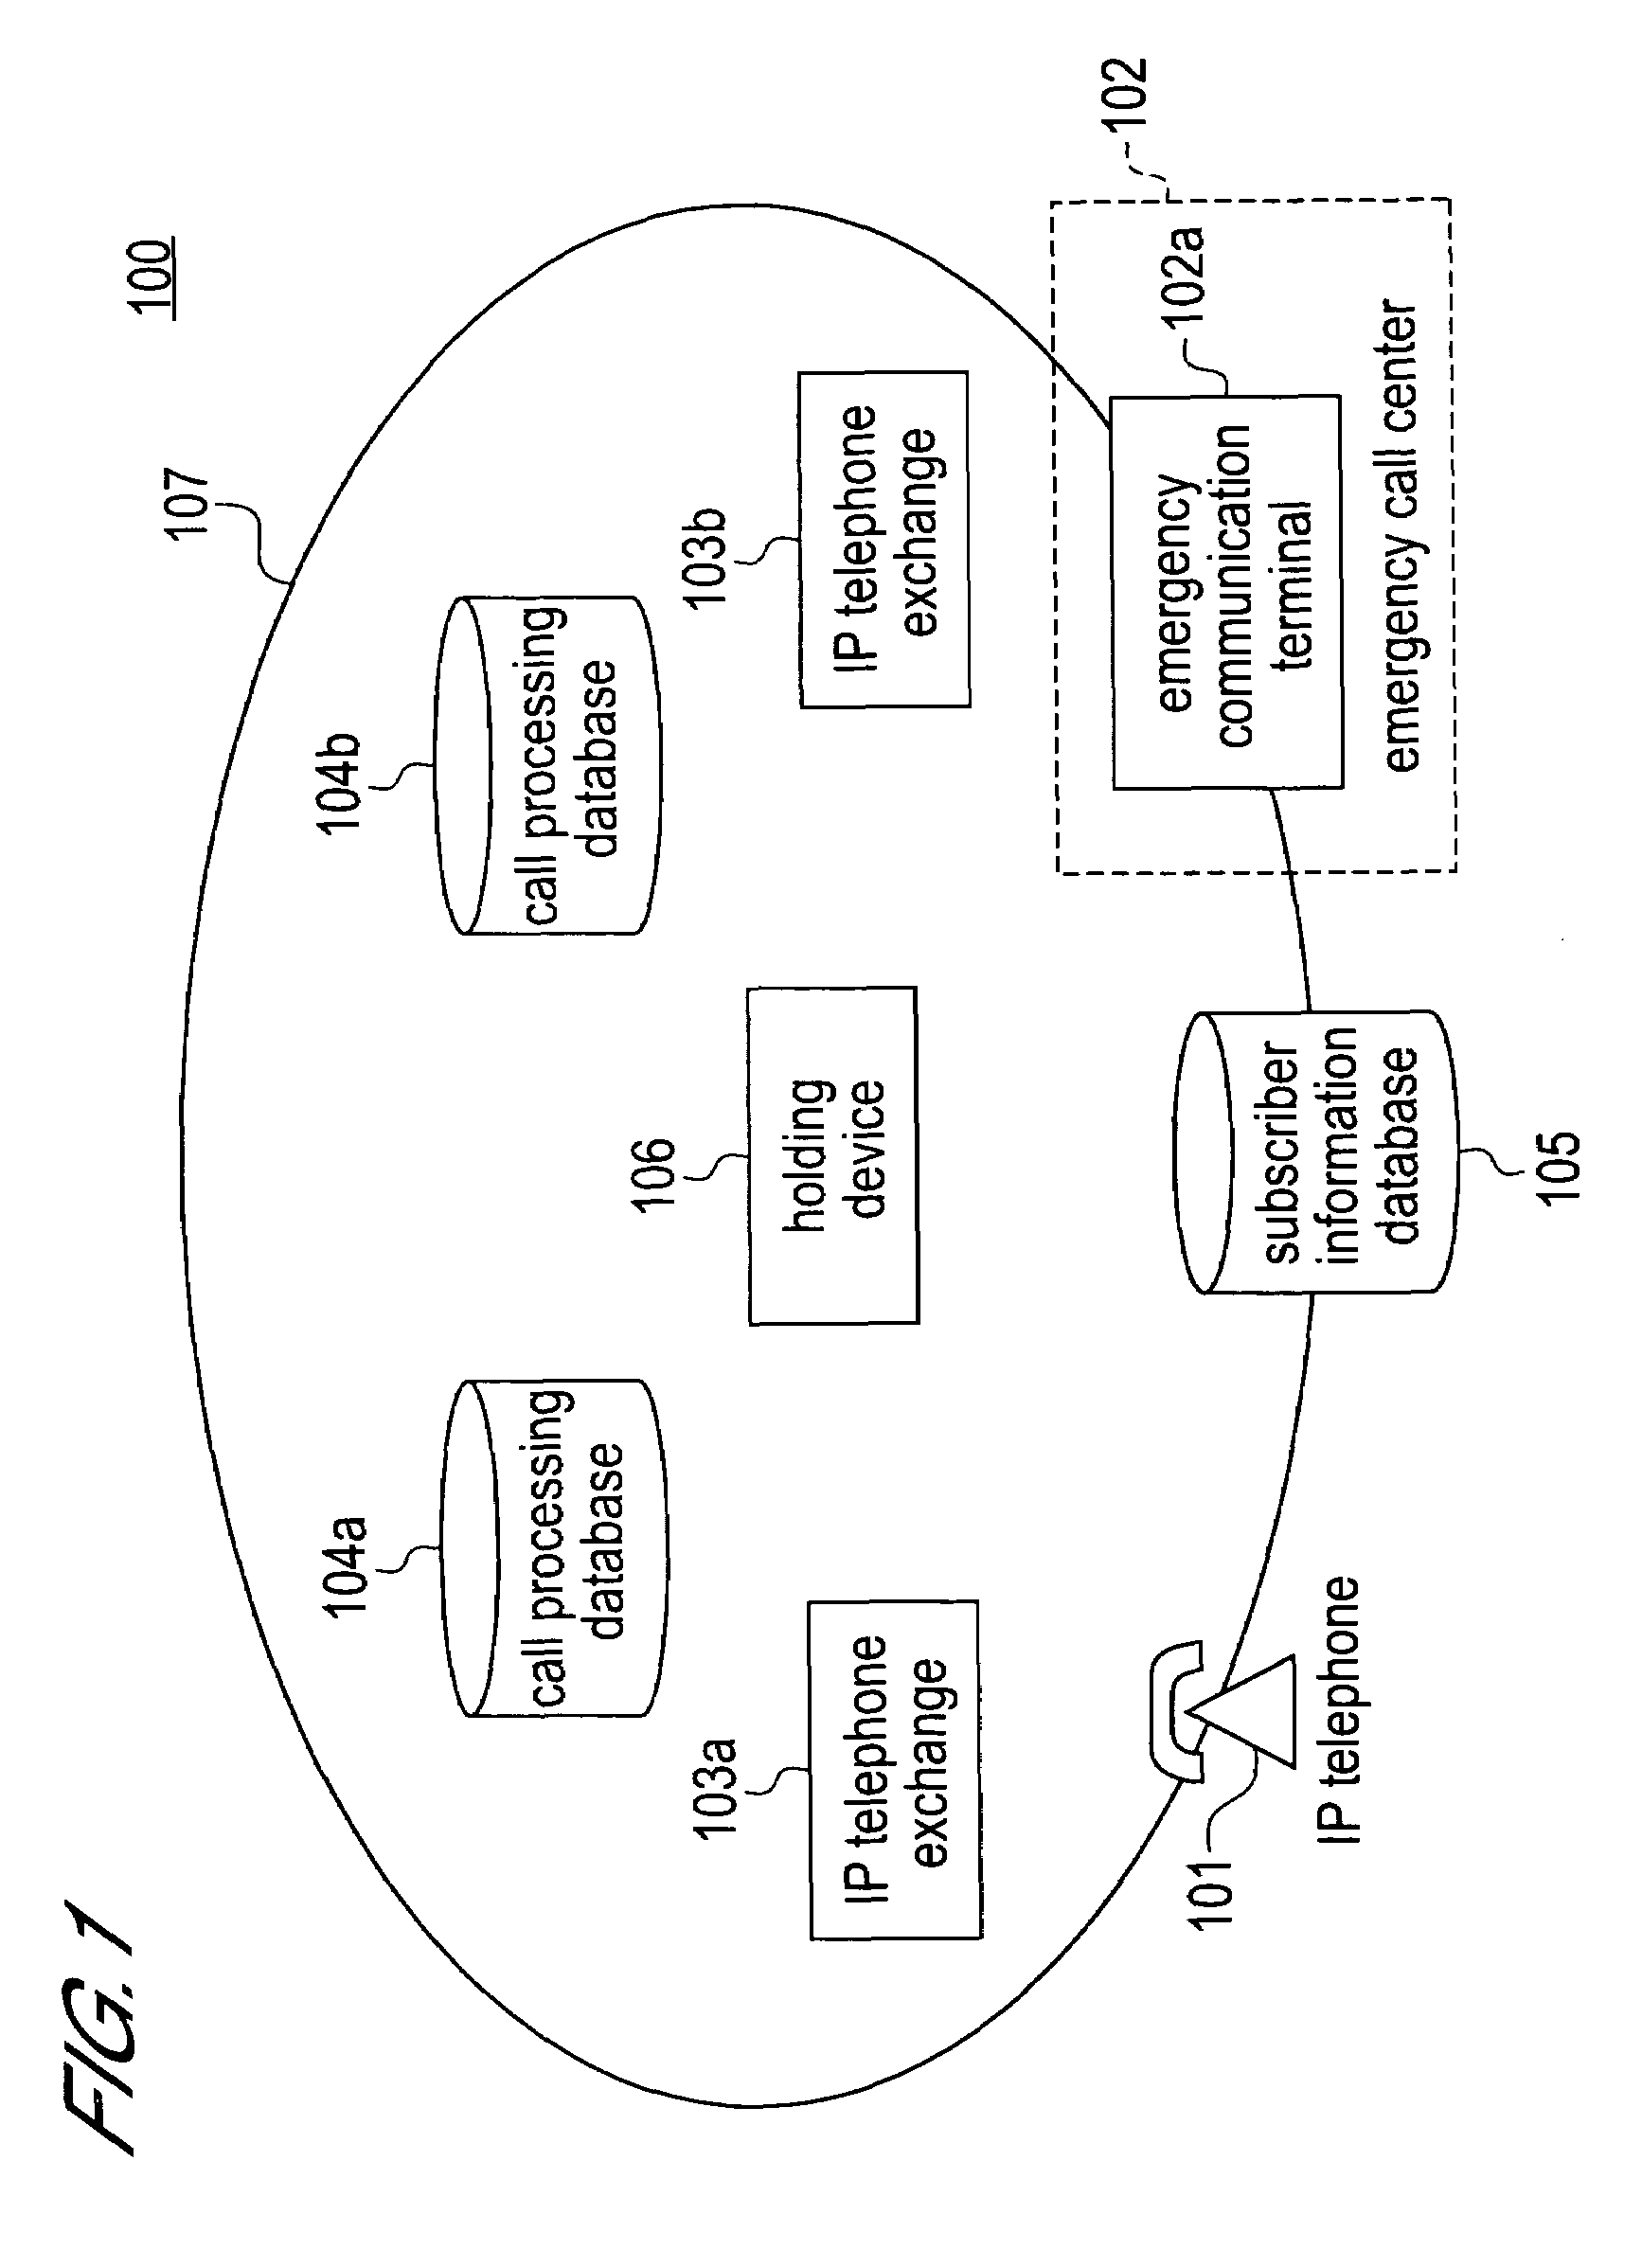 IP telephone system having a hold function and a callback function